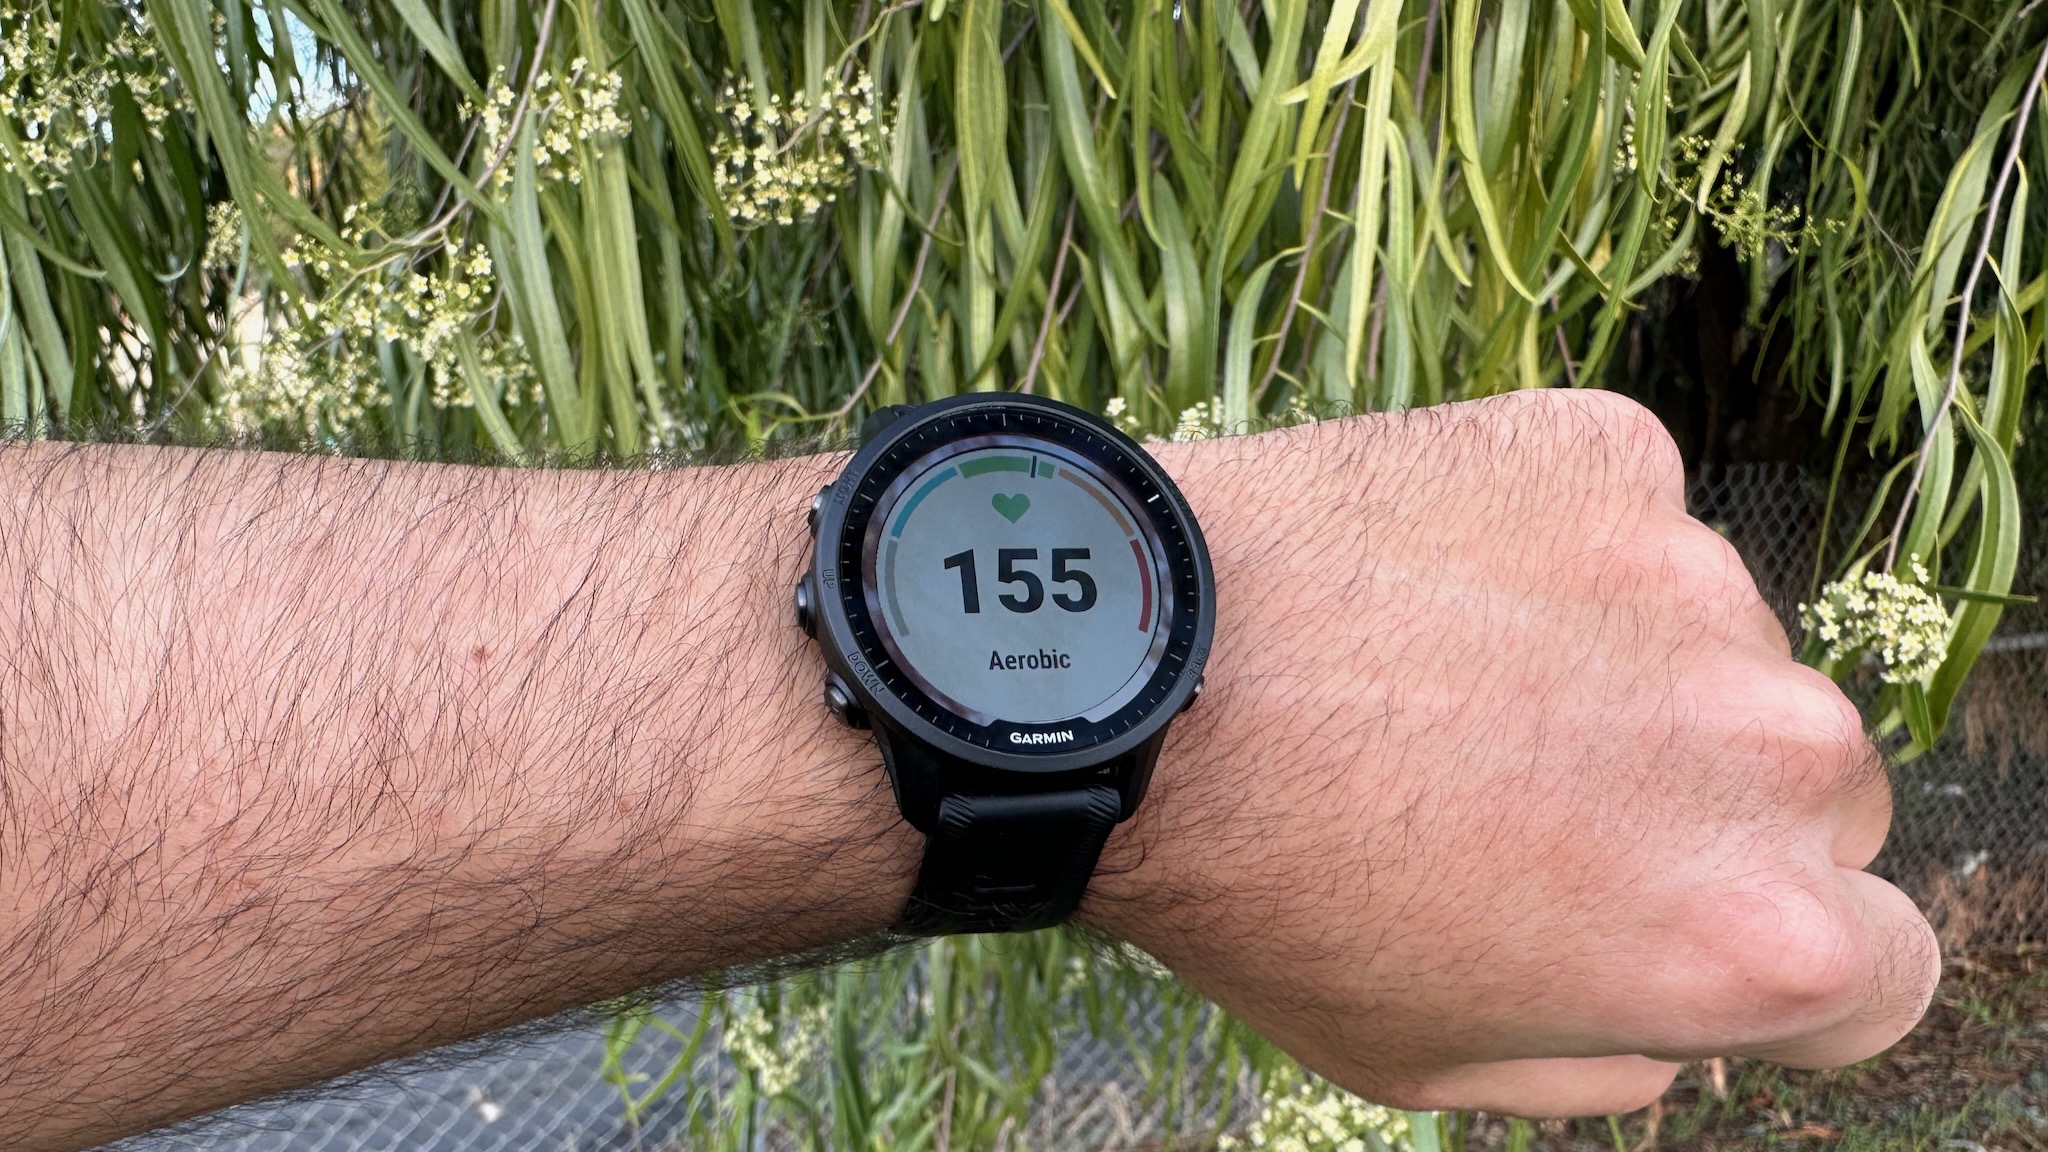 Heart rate of 155 (aerobic zone) on the Garmin Forerunner 955